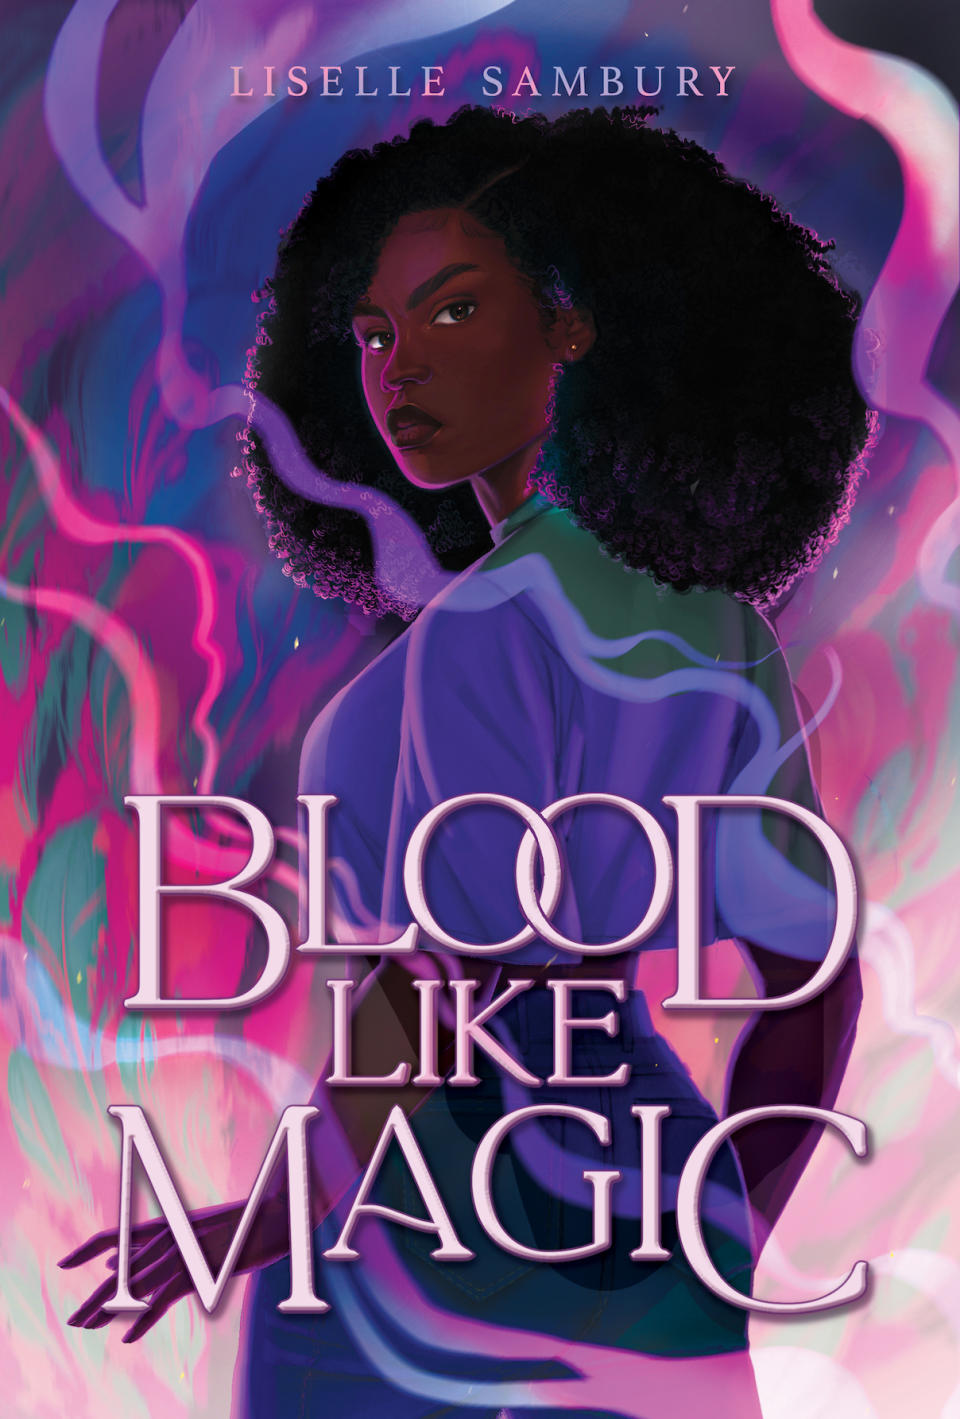 An illustrated Black teen surrounded by pink and purple smoke tendrils on the Blood Like Magic book cover